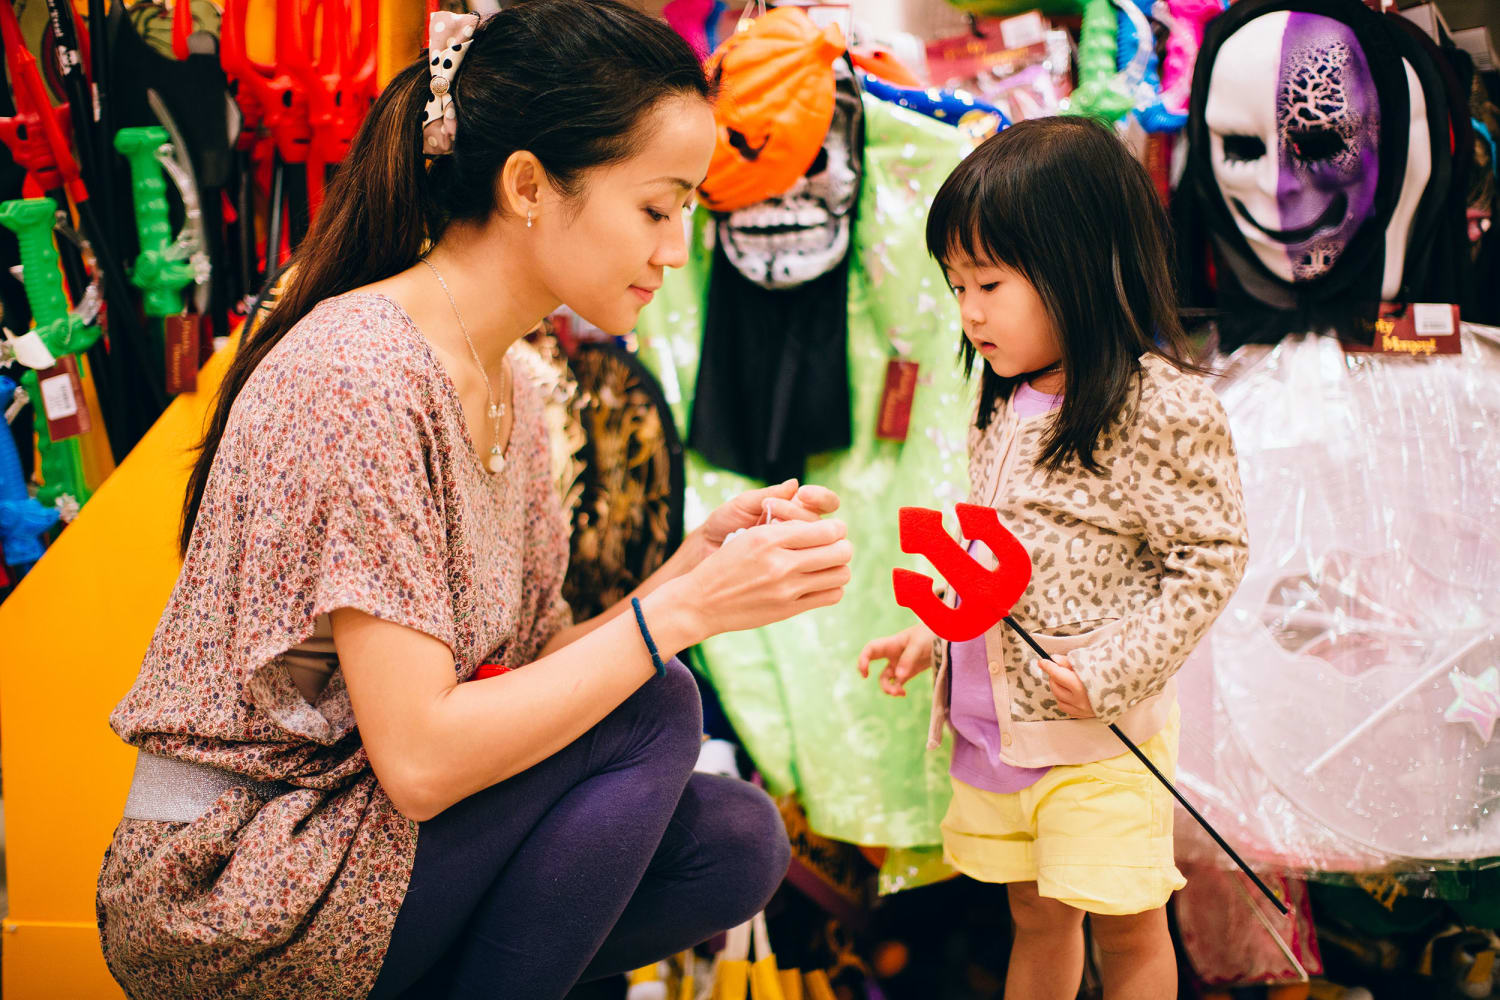 Are Kids' Halloween Costumes Getting Too Adult? - Child Mind Institute